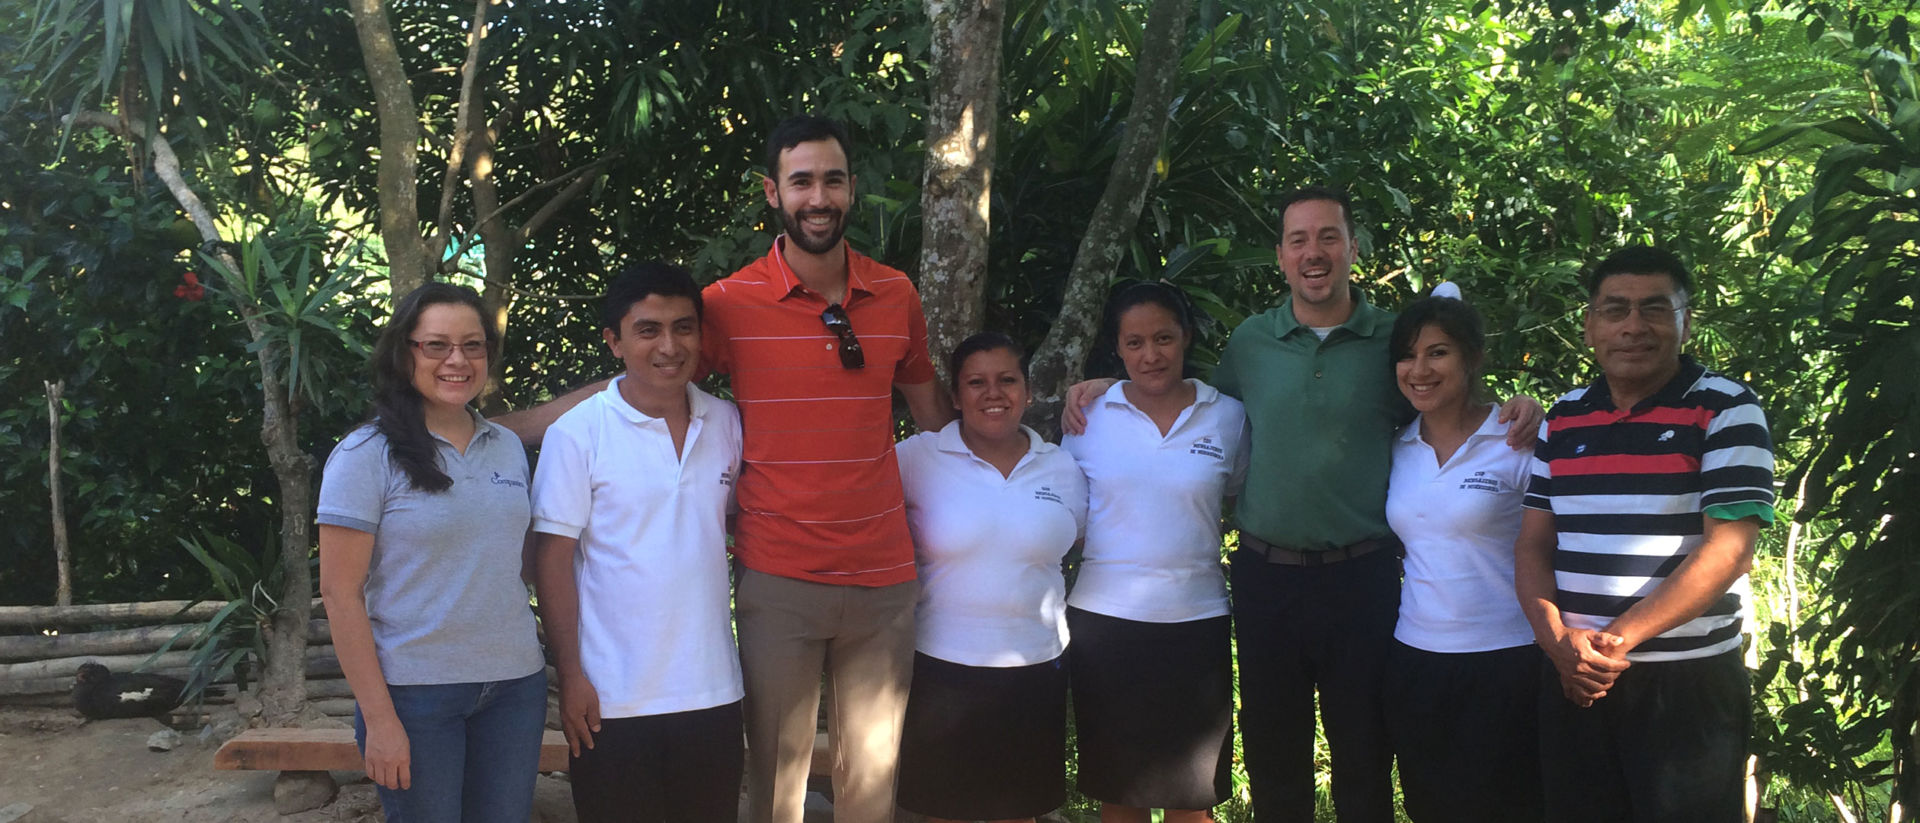 Cameron Tringale and the staff at a Compassion center in El Salvador